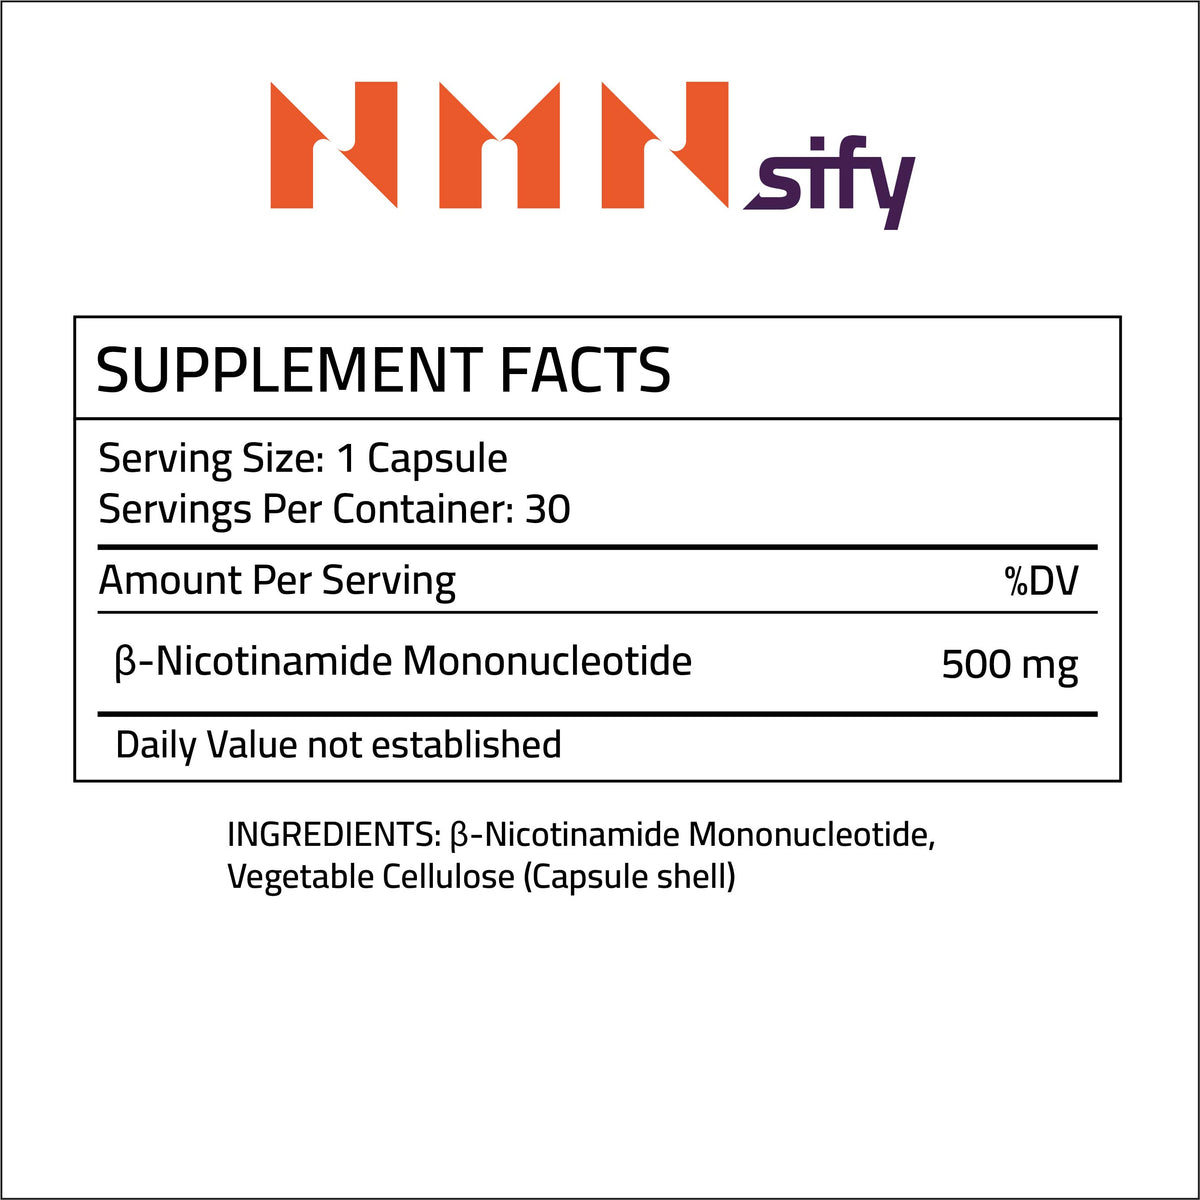 NMNsify-Nicotinamide-Mononucleotide-NMN-supplement-NMN-NMN-supplement-UK-500mg-no-additives-30-capsules-supplement-facts